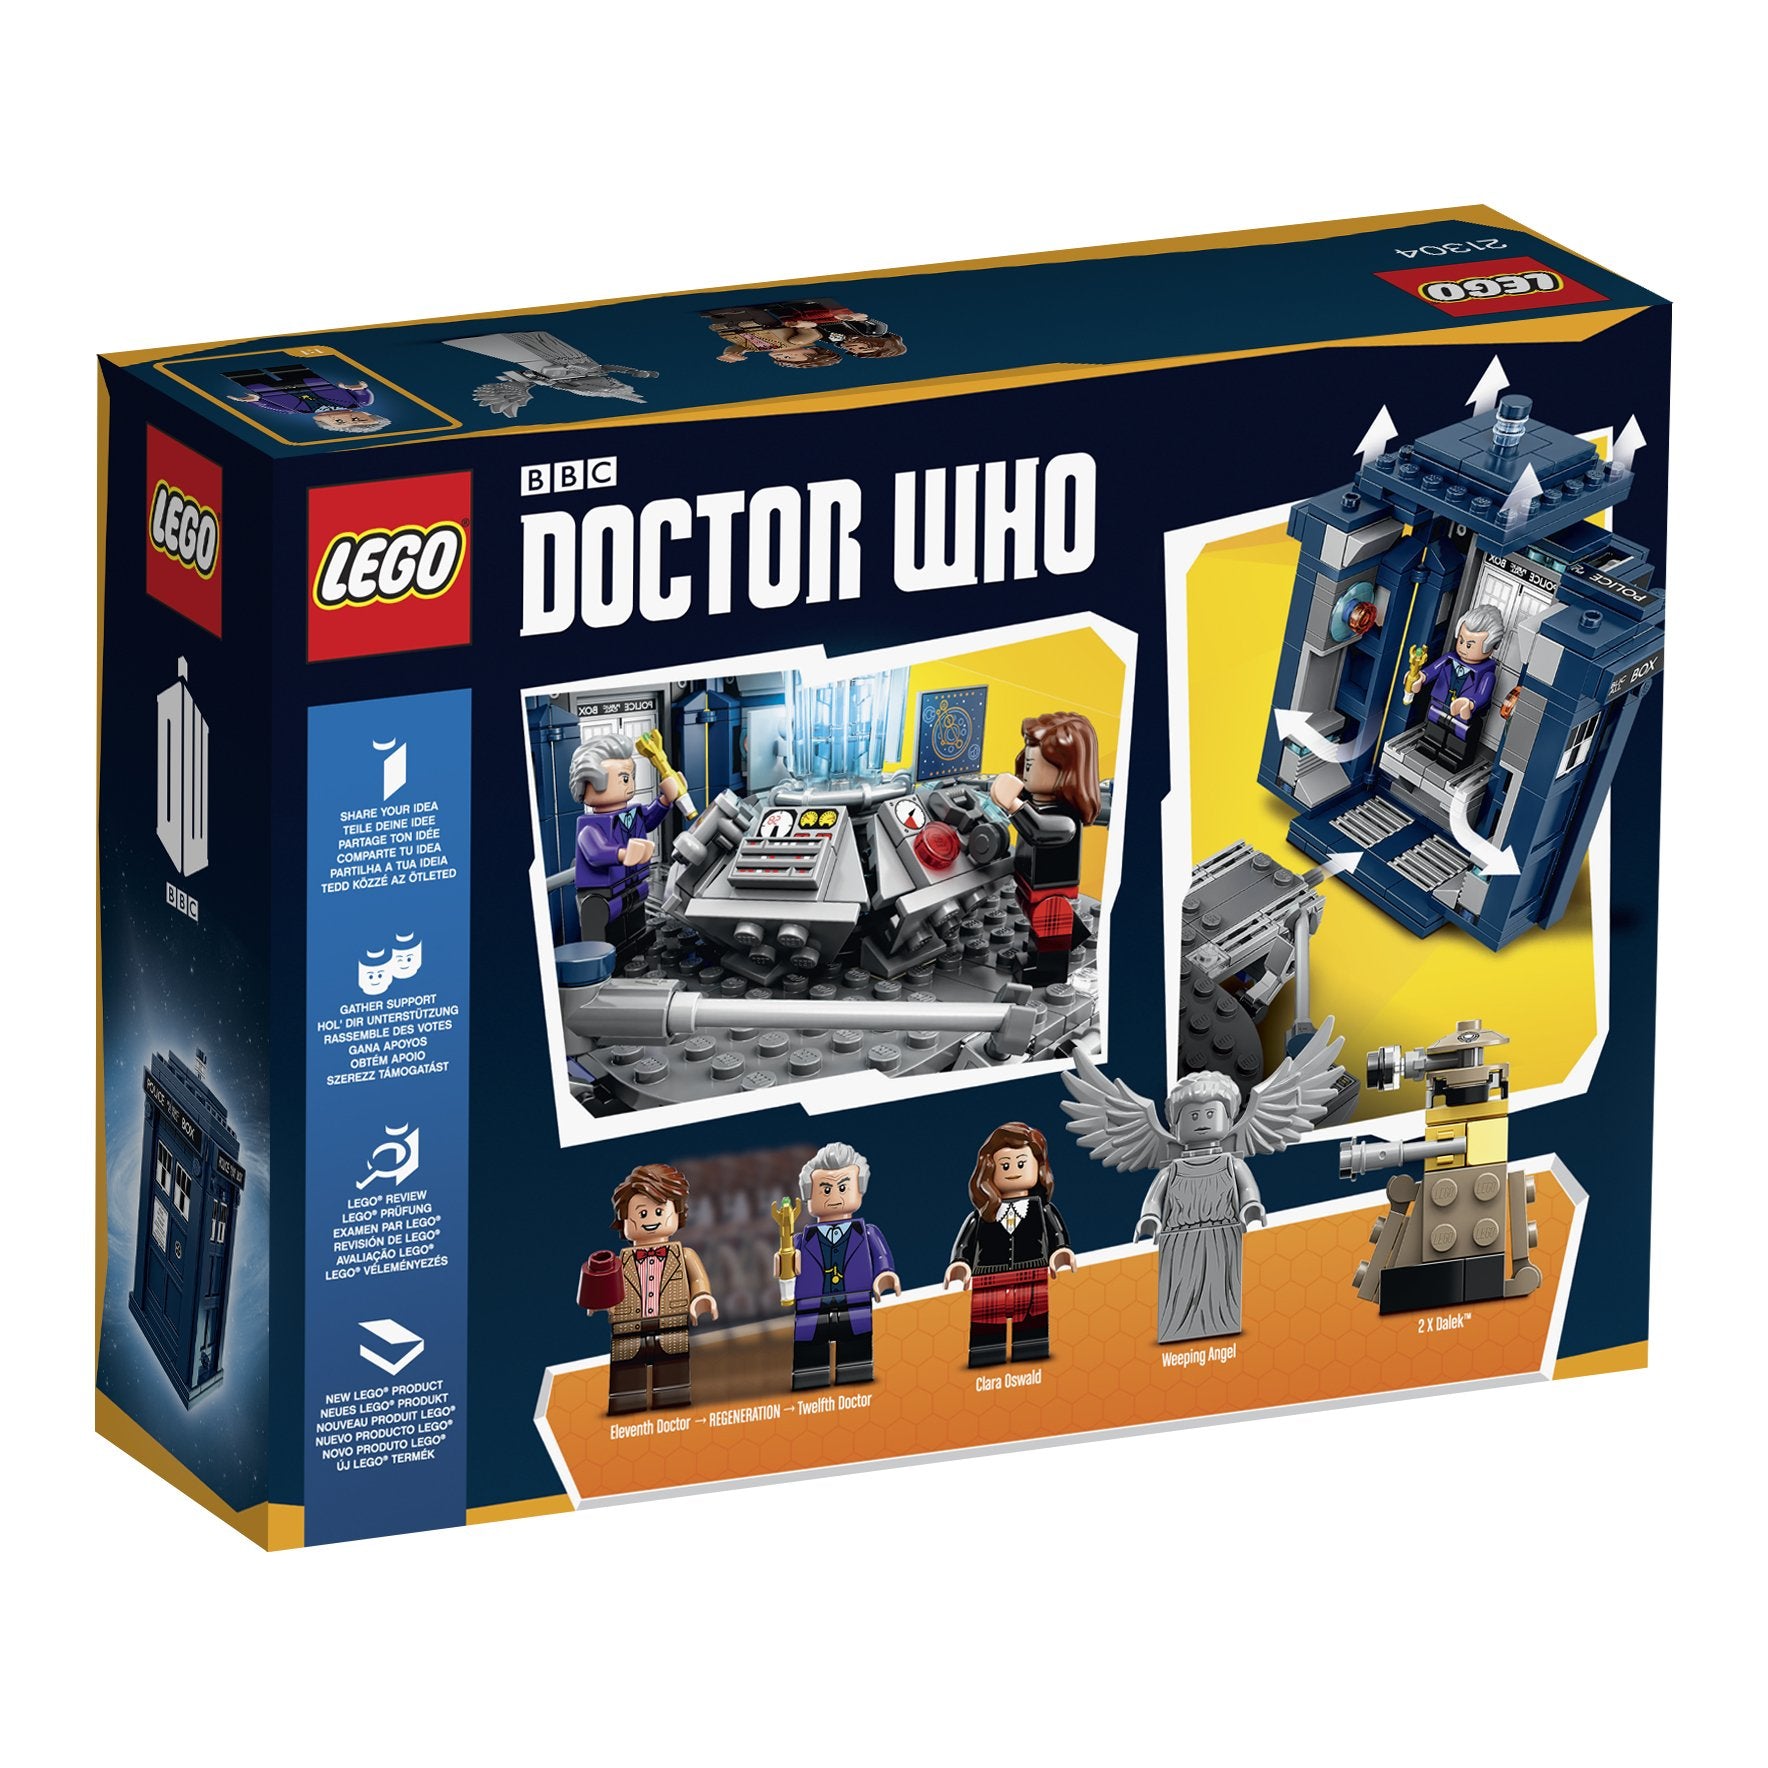 LEGO Ideas Doctor Who 21304 Building Kit